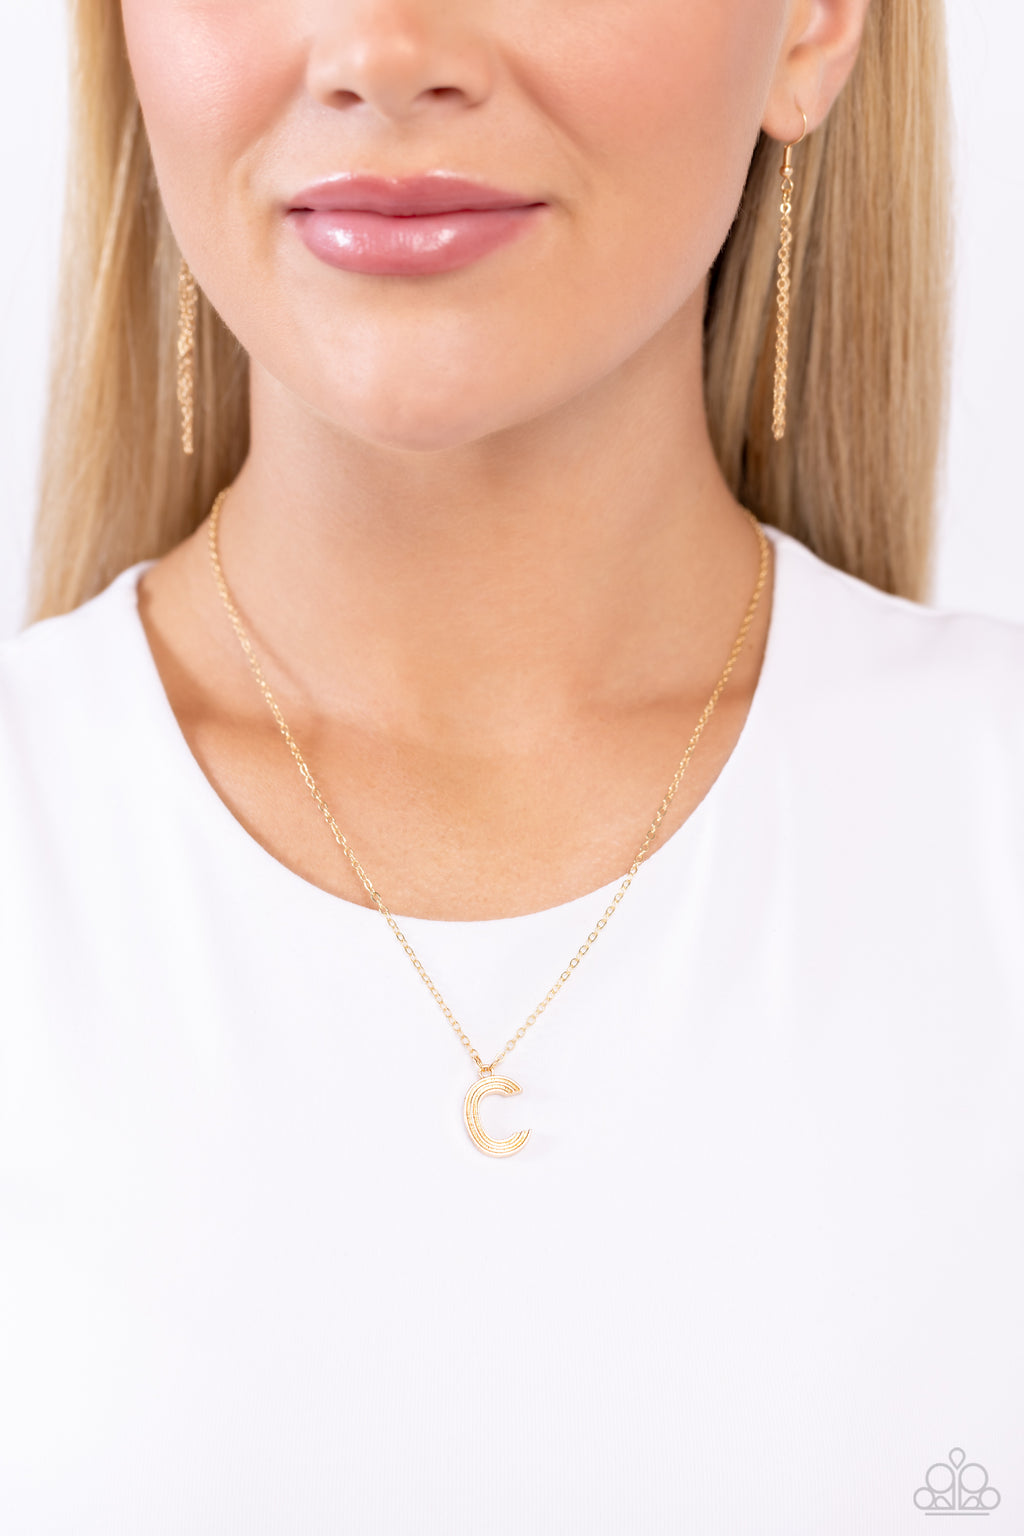 Paparazzi - Leave Your Initials - Gold - C Necklace